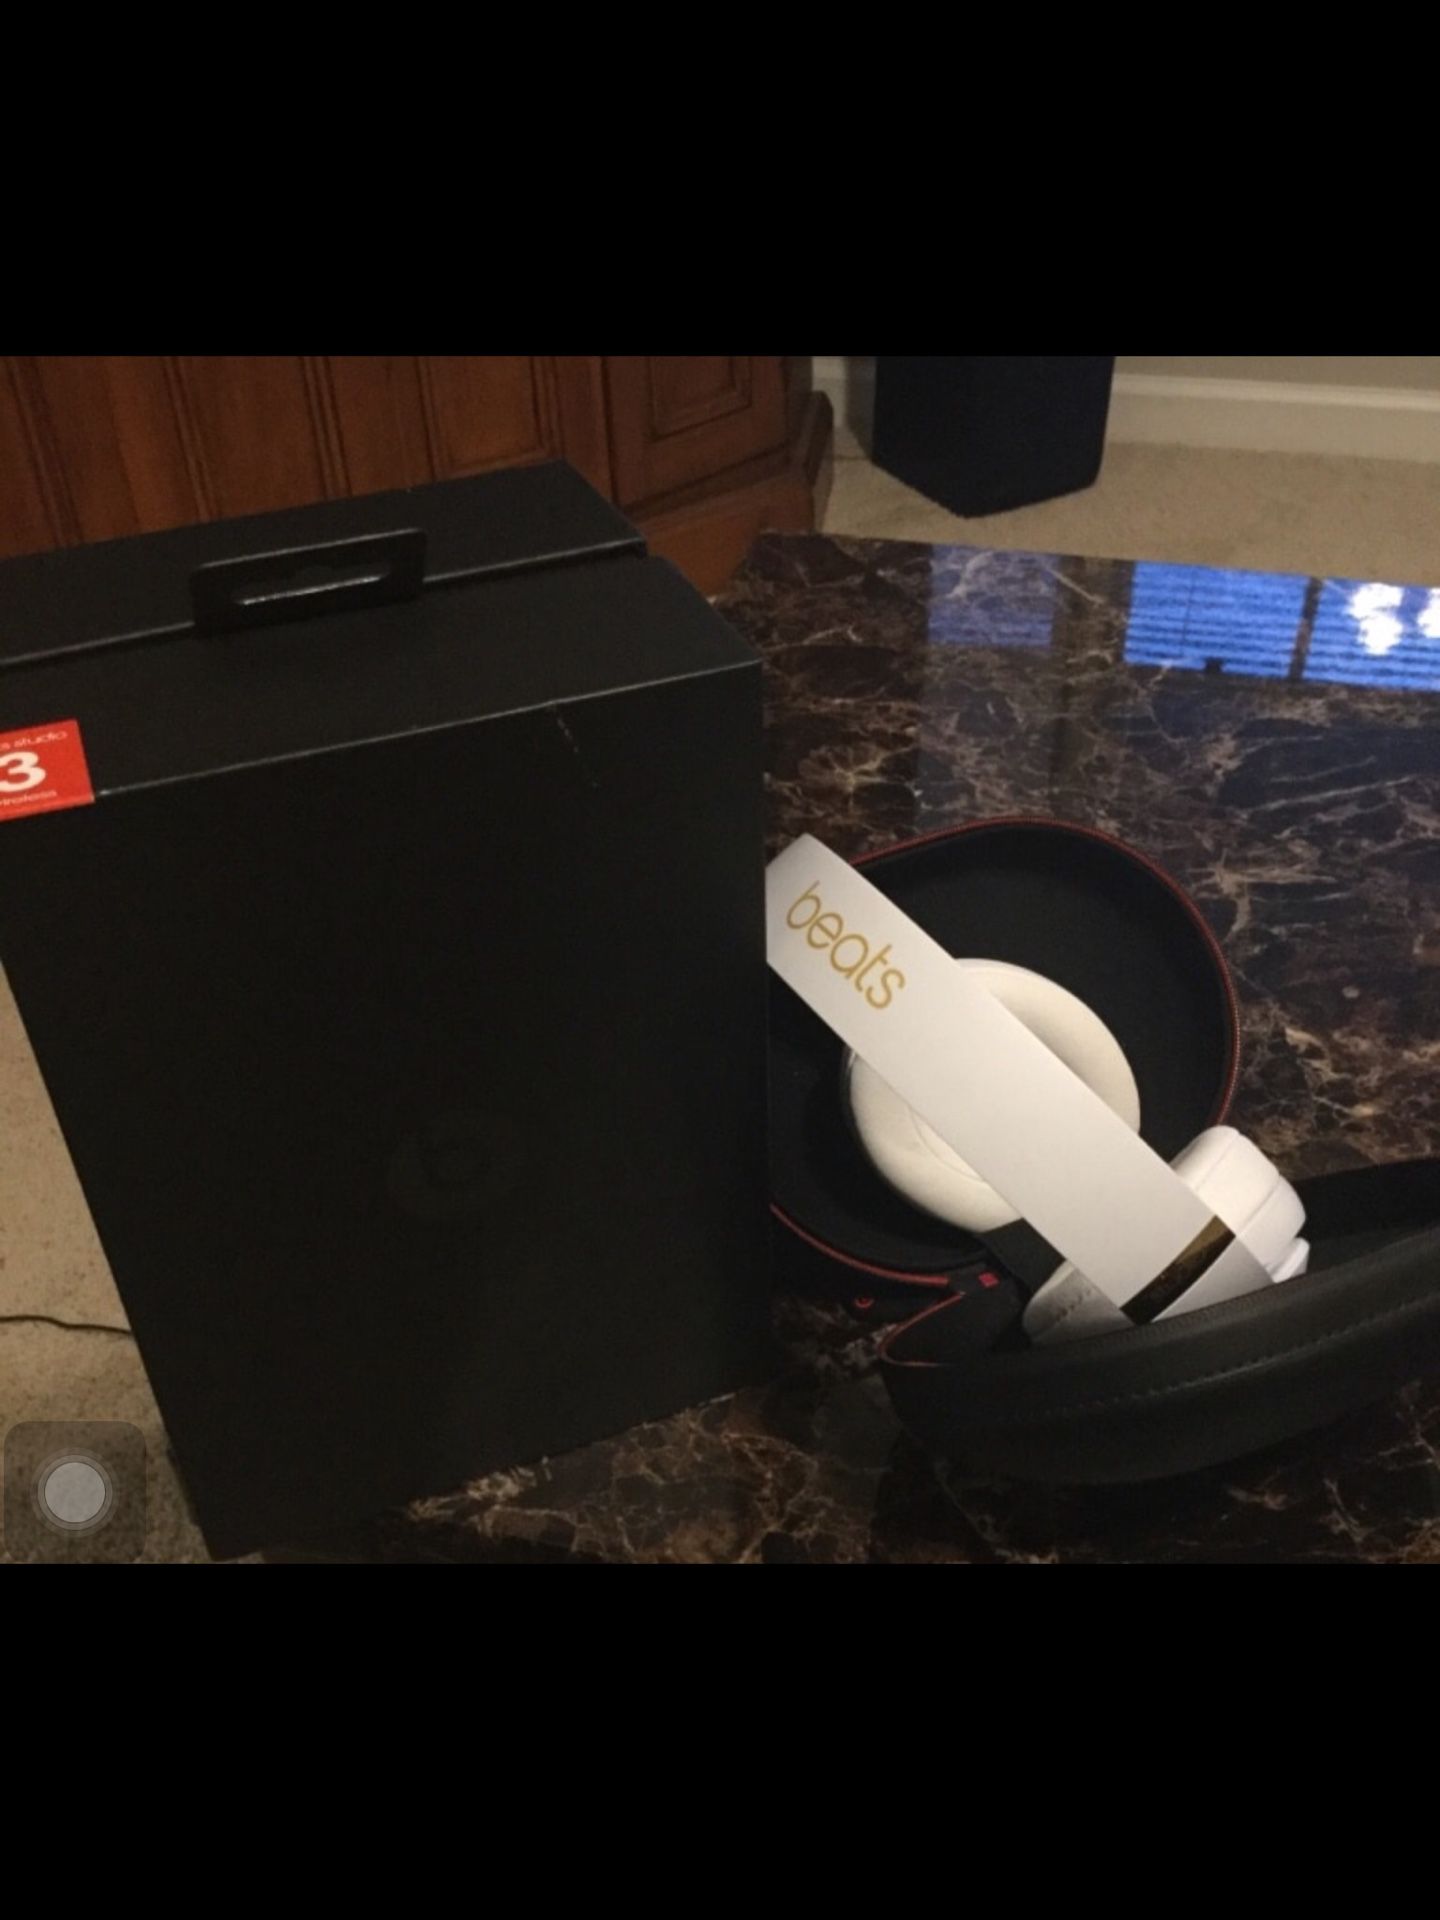 Beats Studio 3 Wireless (White, everything included)